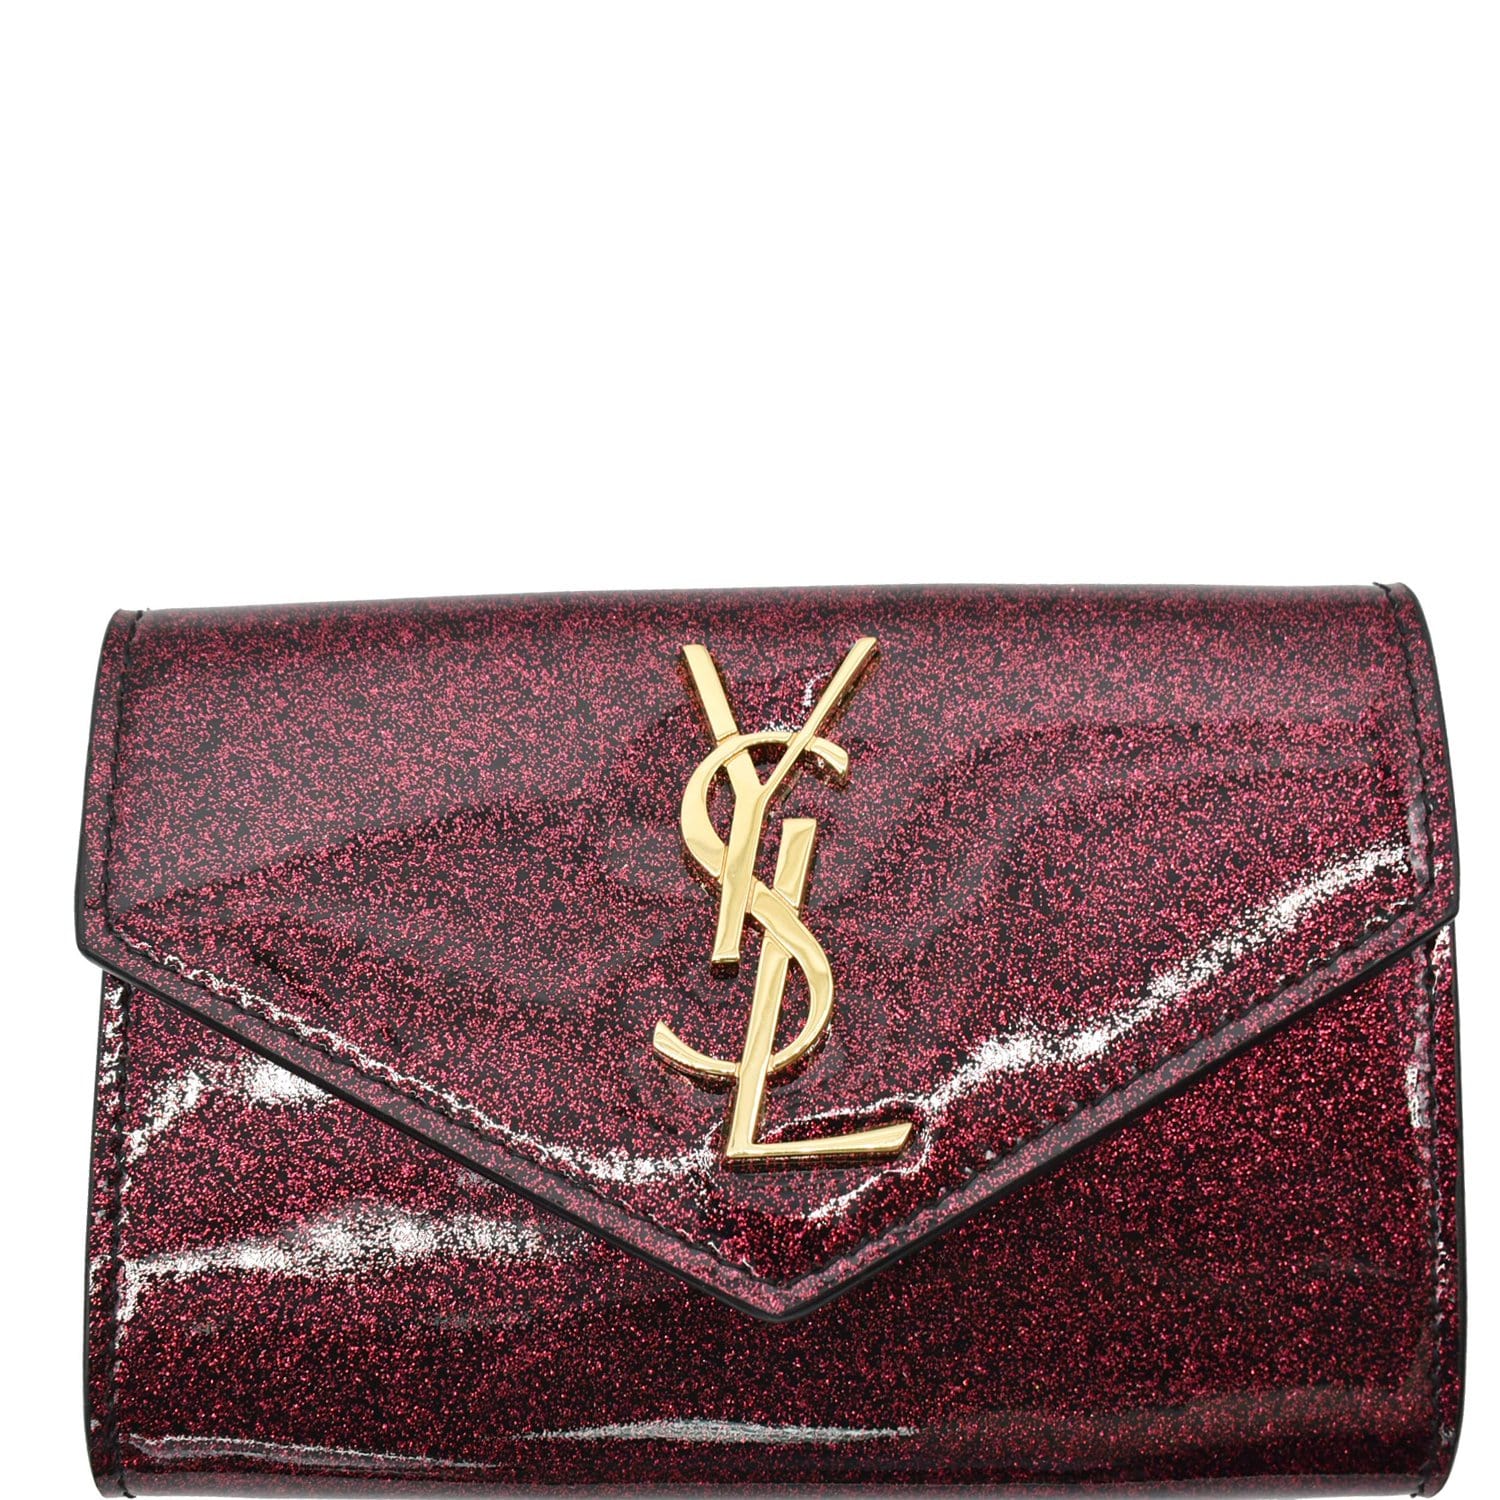 Patent leather wallet